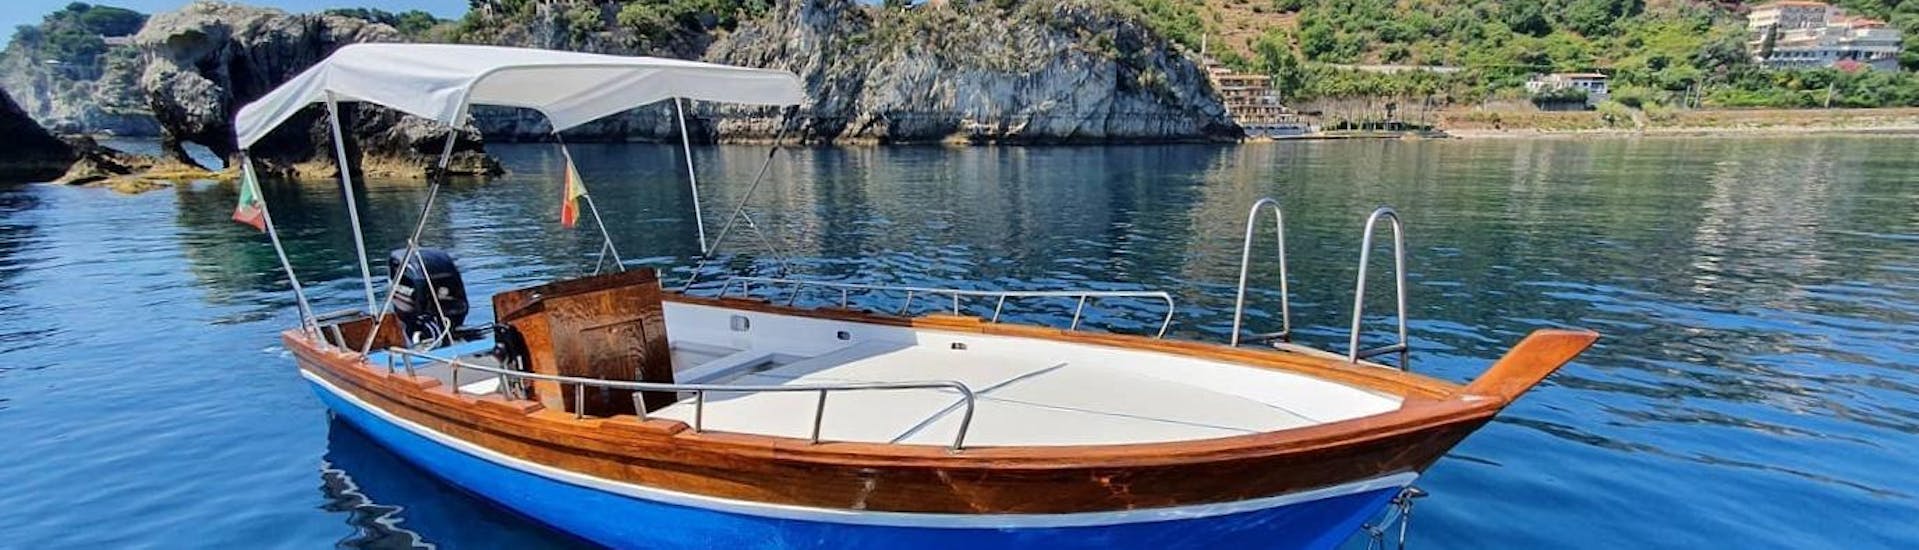 Traditional wooden boat used for boat trips by Boat Experience Taormina.